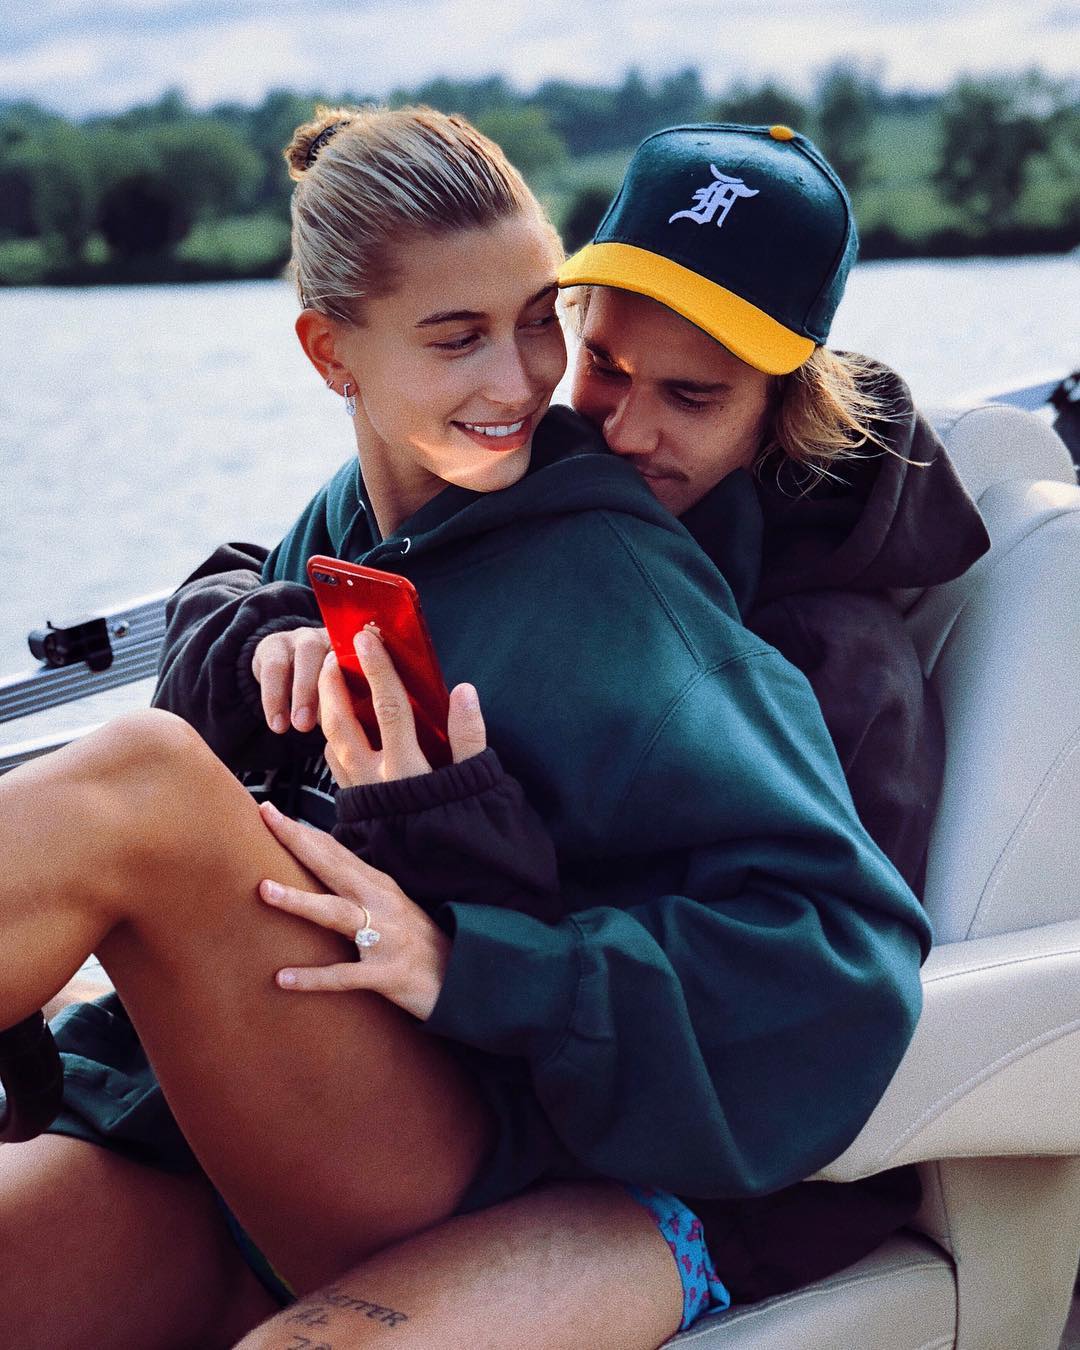 Hailey Baldwin Shows Off Her $500K Engagement Ring